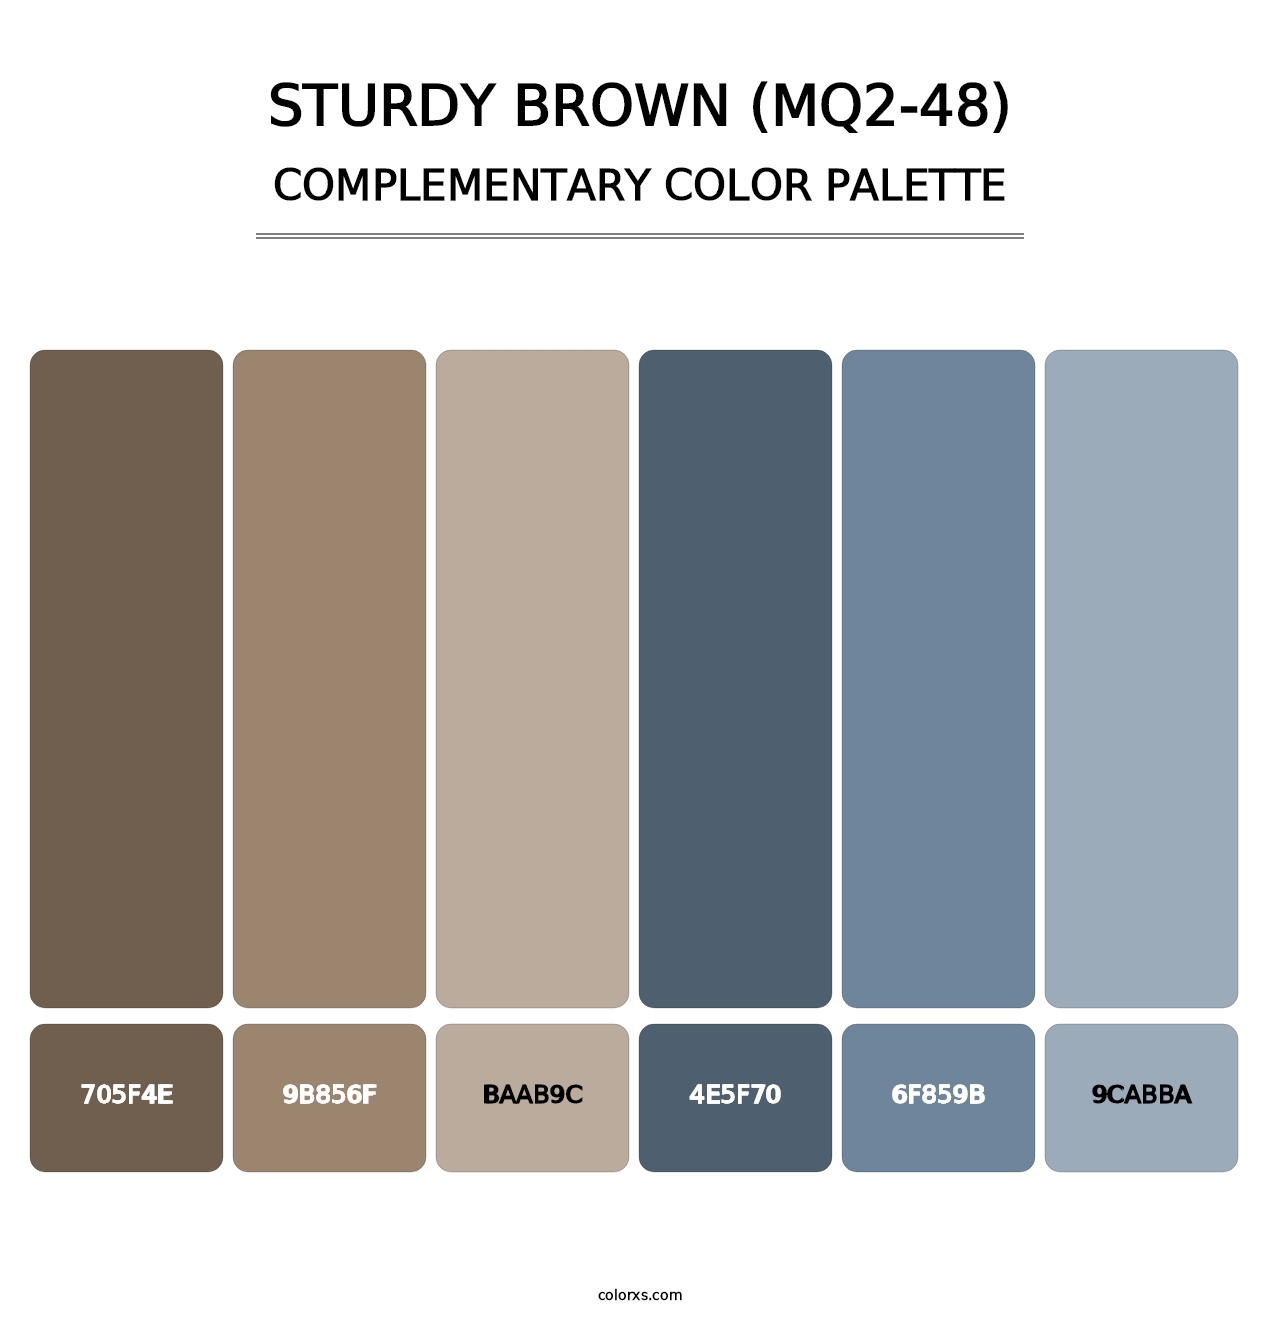 Sturdy Brown (MQ2-48) - Complementary Color Palette